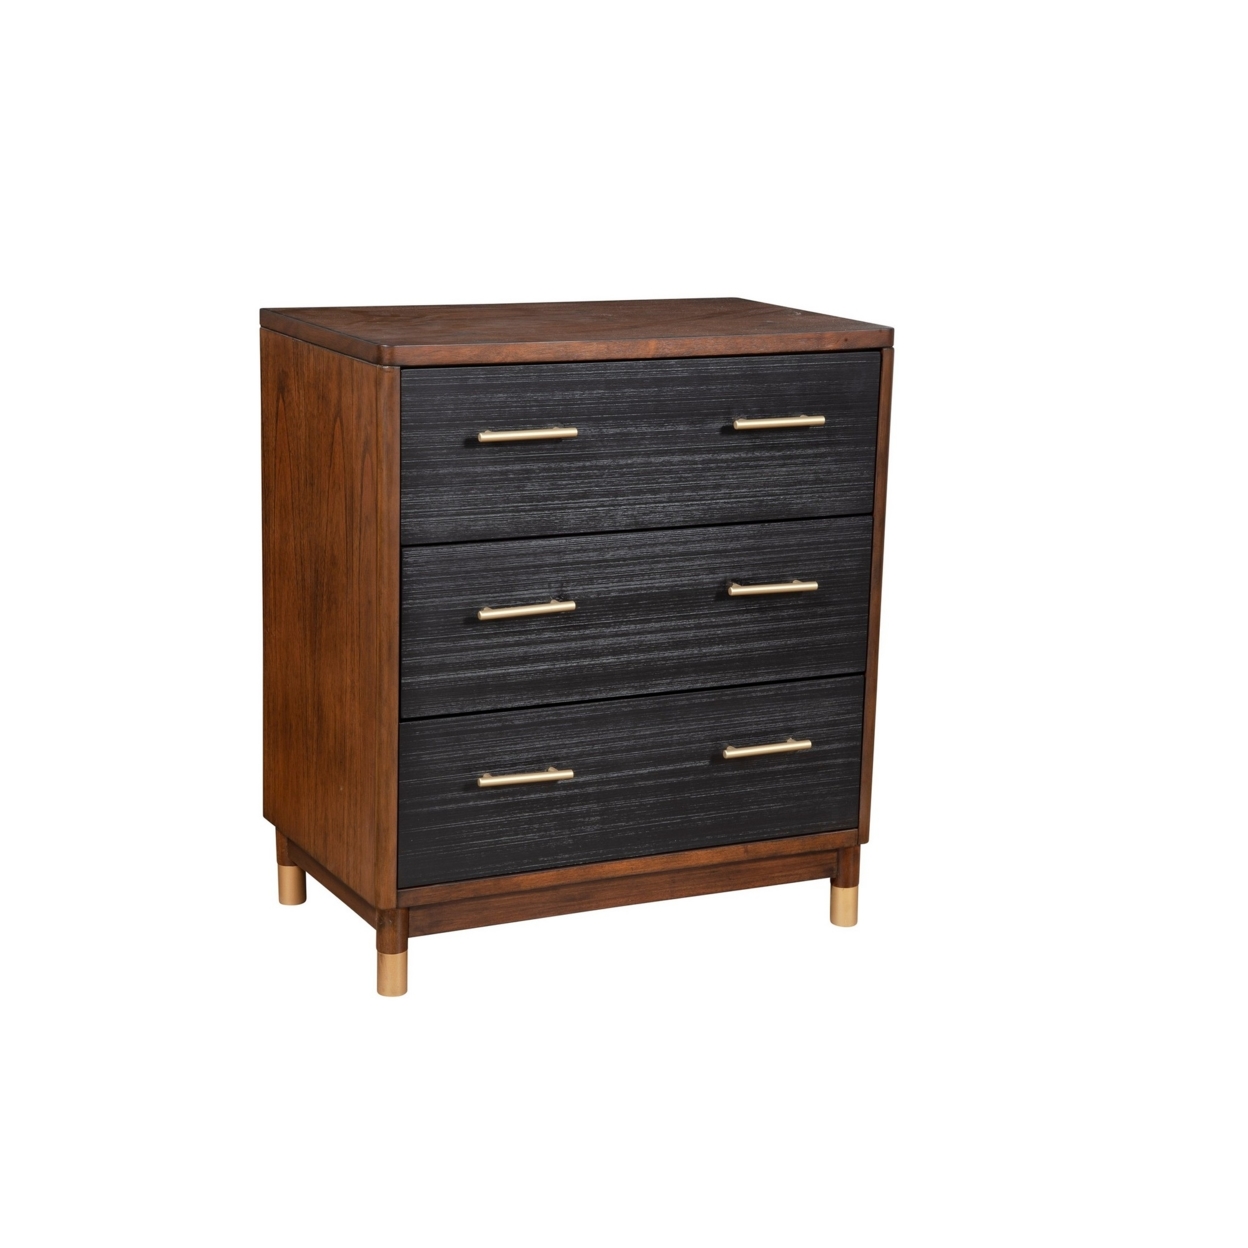 Chest With 3 Drawers And Round Legs, Brown And Black- Saltoro Sherpi